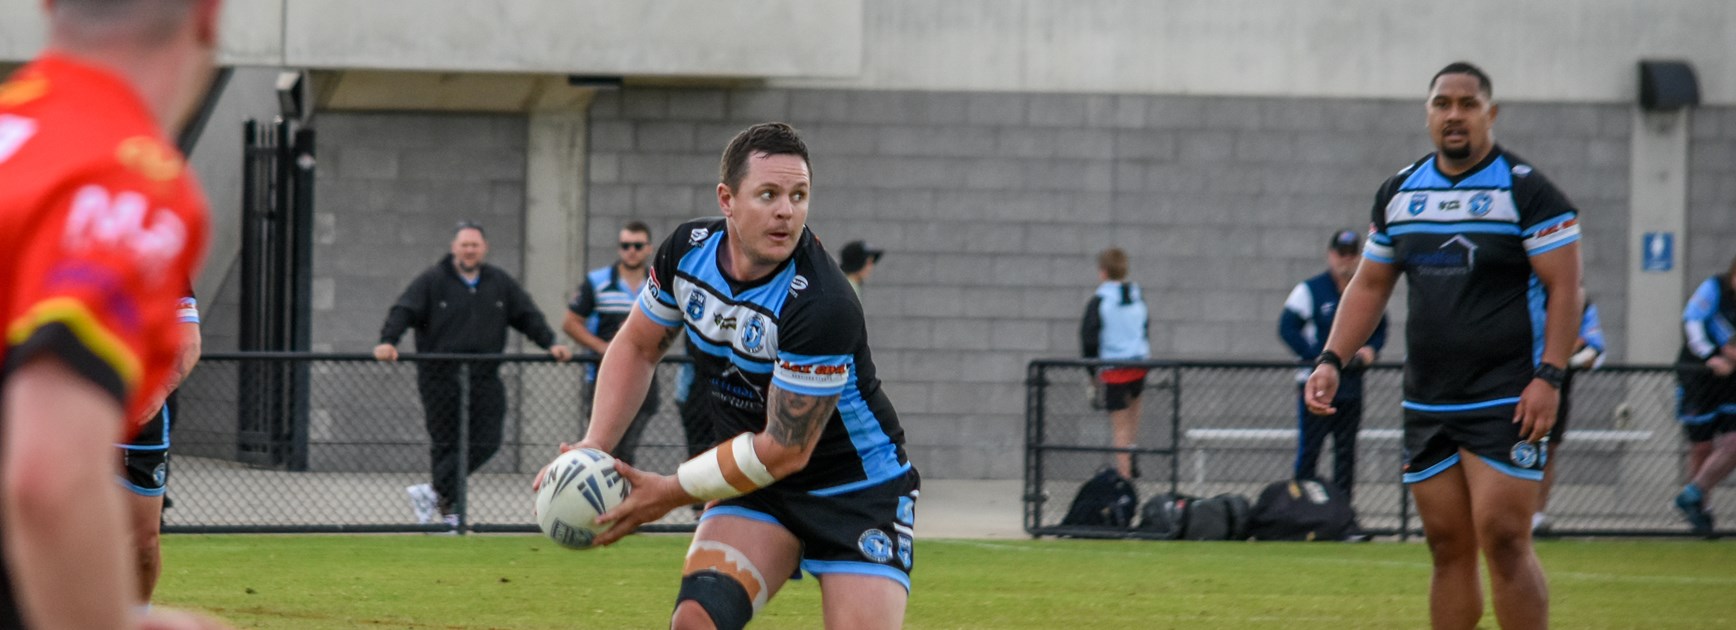 Sharks runaway with an important round one win in the North-side derby